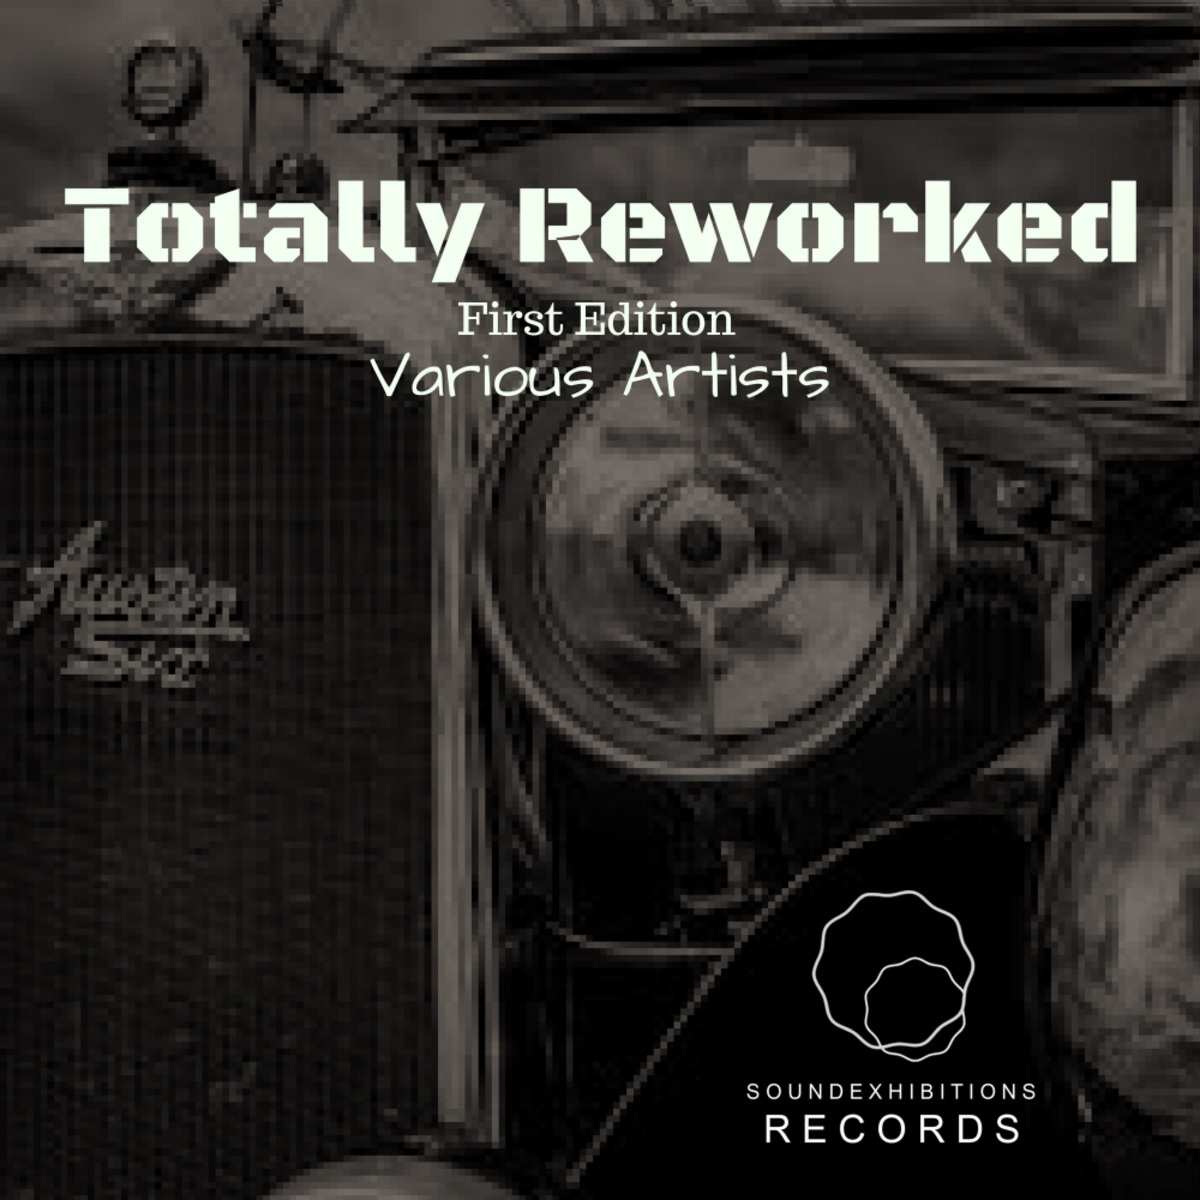 VA - Totally Reworked First Edition / Sound-Exhibitions-Records